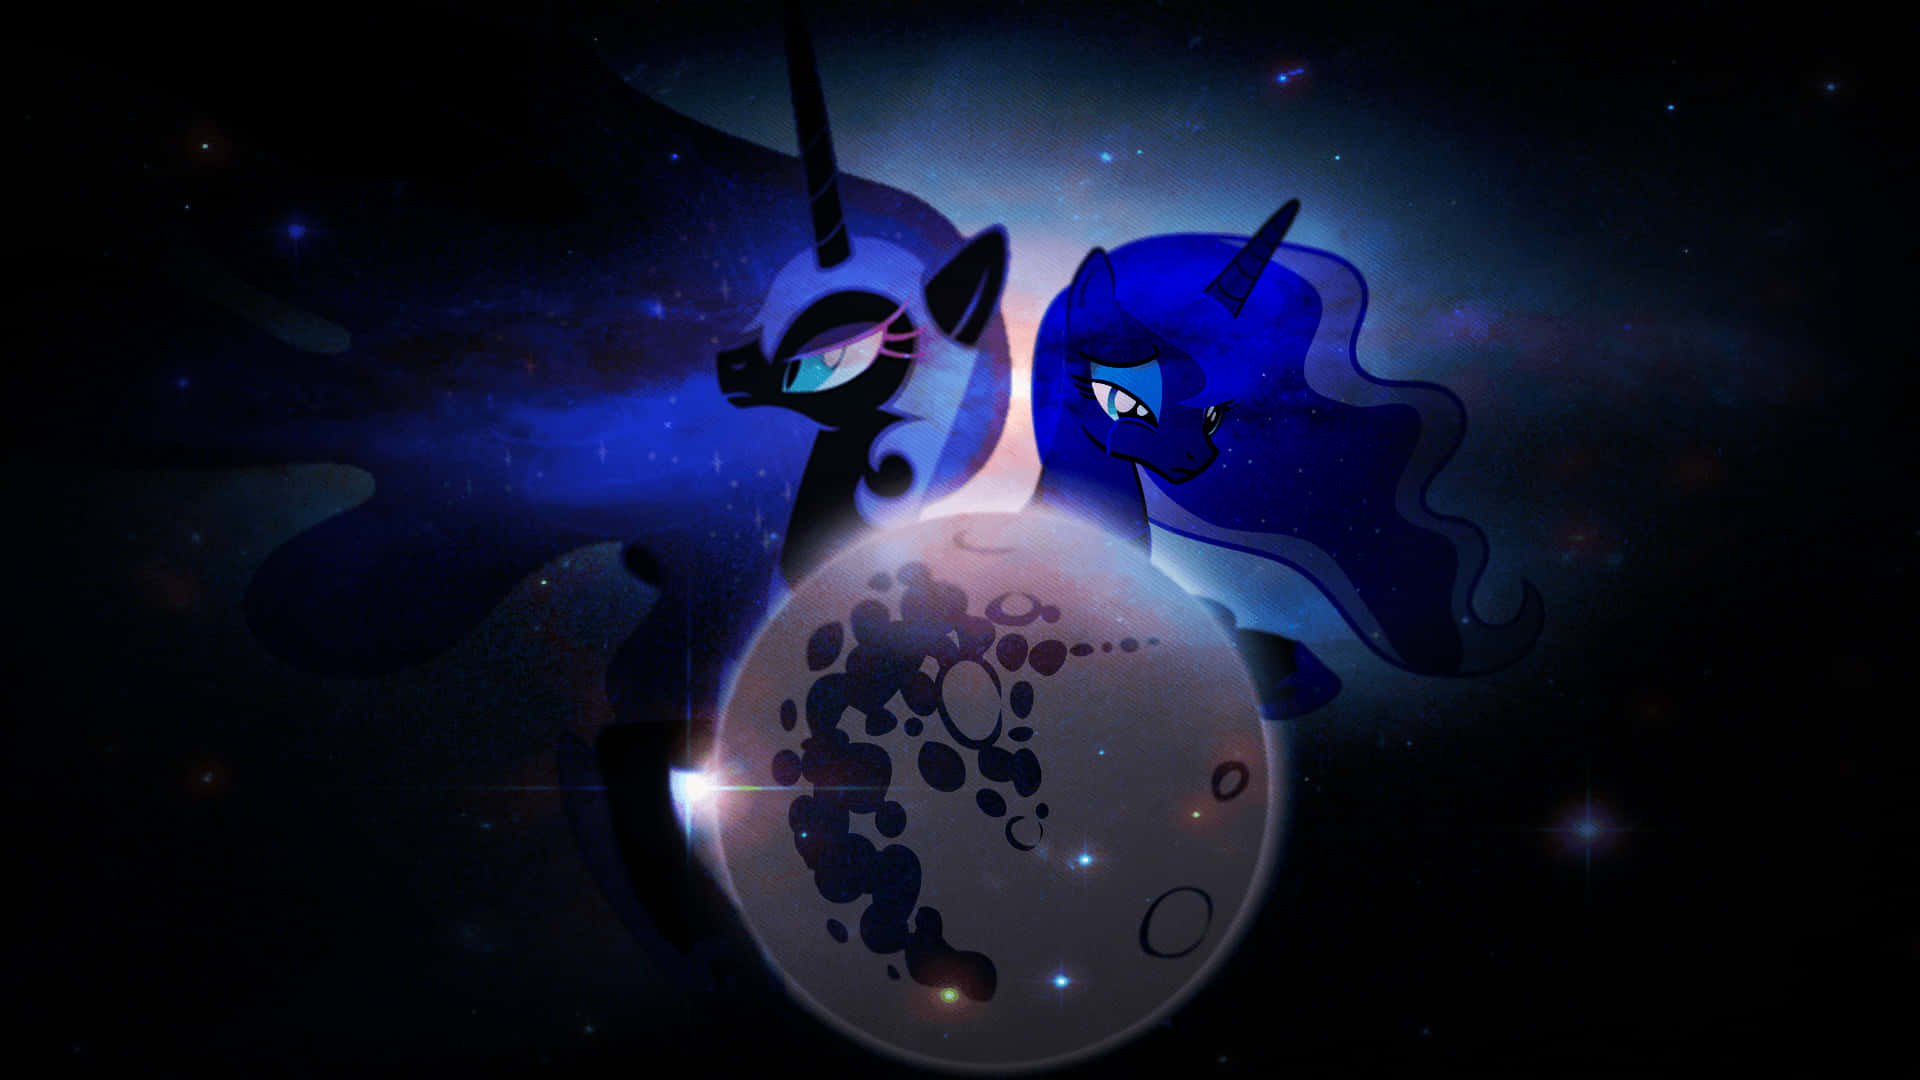 "A hauntingly beautiful depiction of Nightmare Moon" Wallpaper